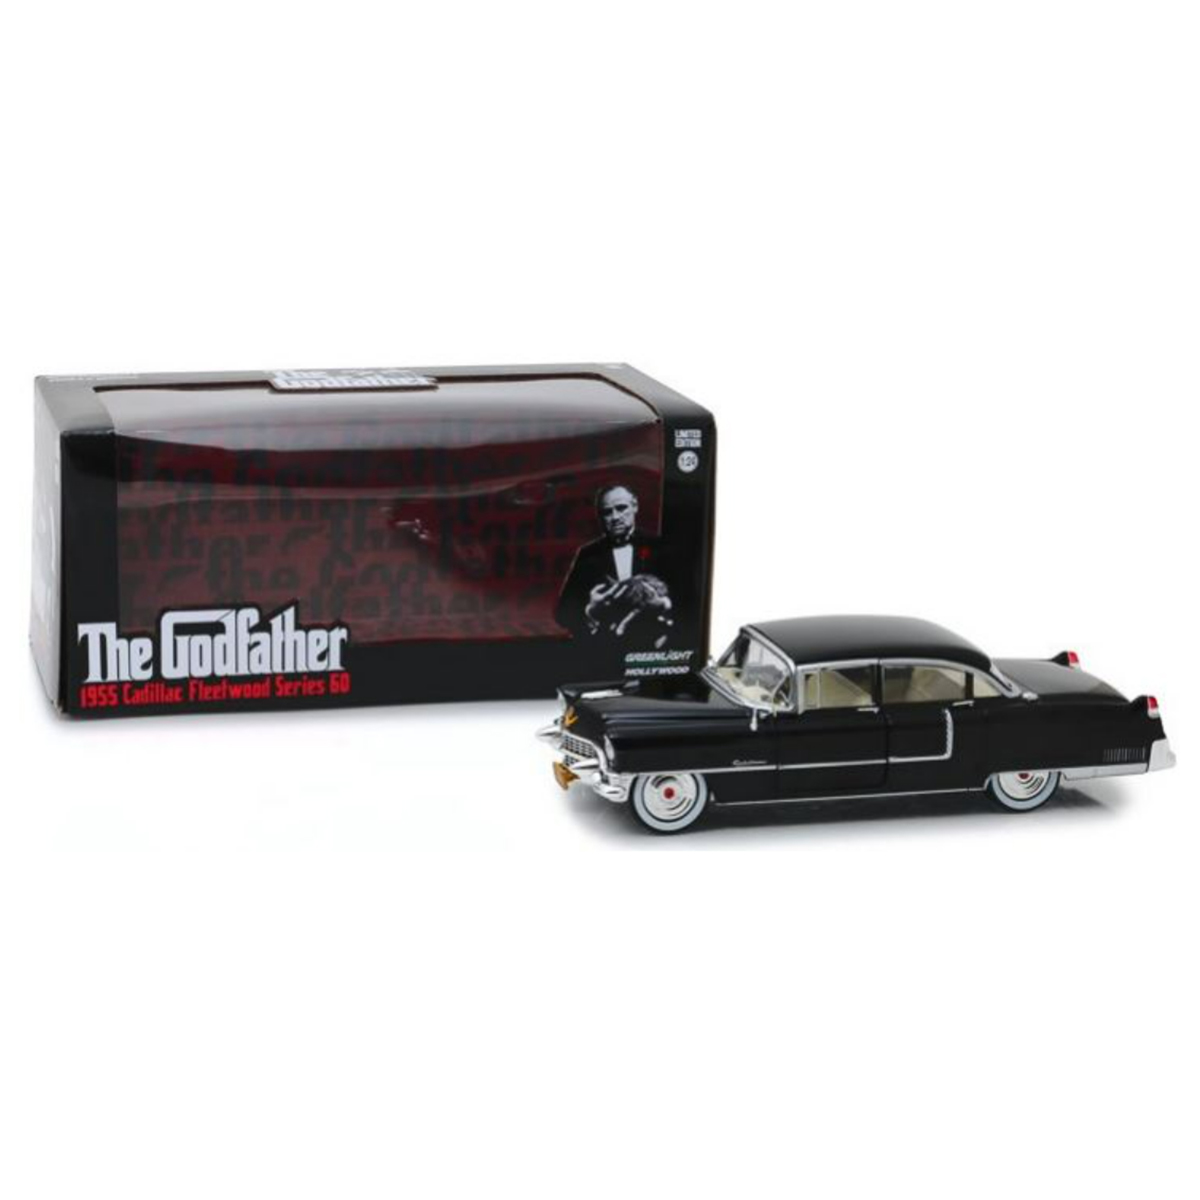 The Godfather Cadillac Diecast